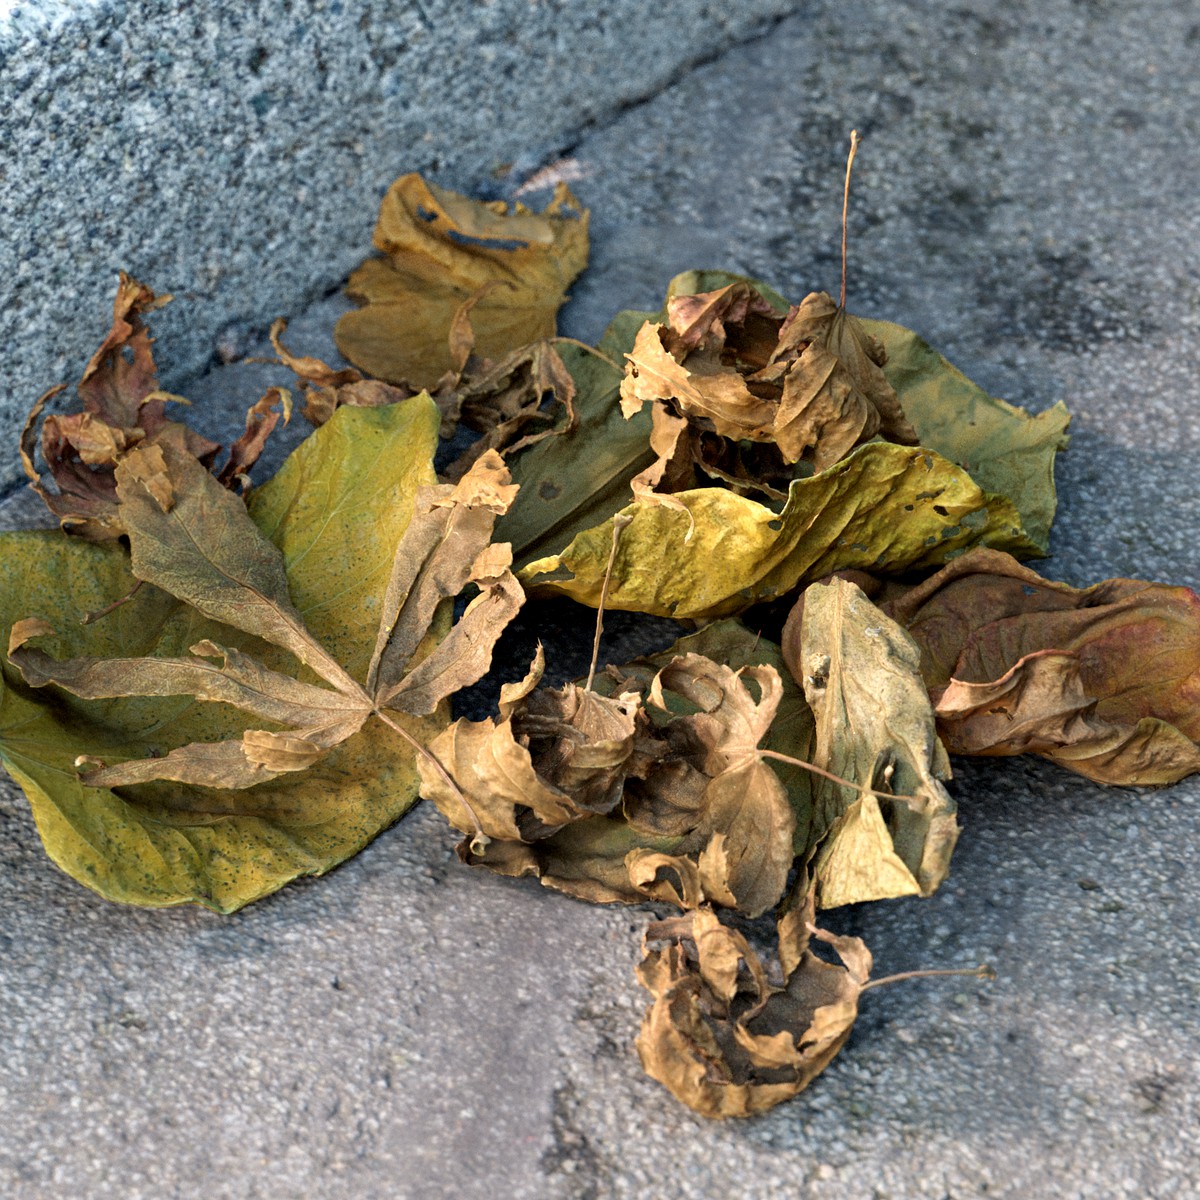 A pile of dried leaves